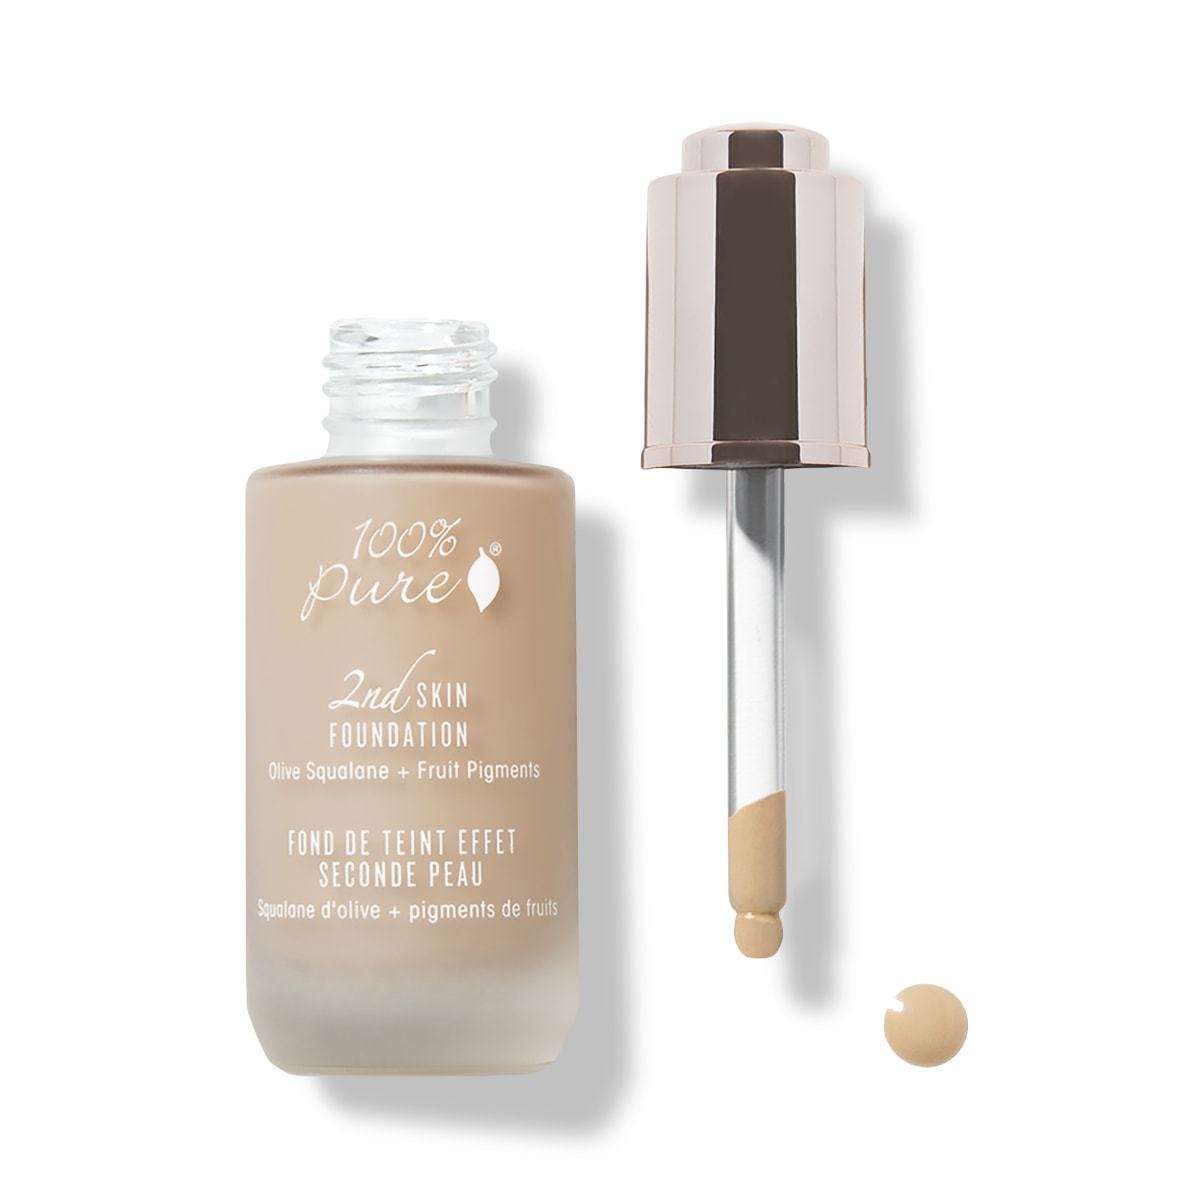 100% Pure® Fruit Pigmented® 2nd Skin Foundation, Shade 4